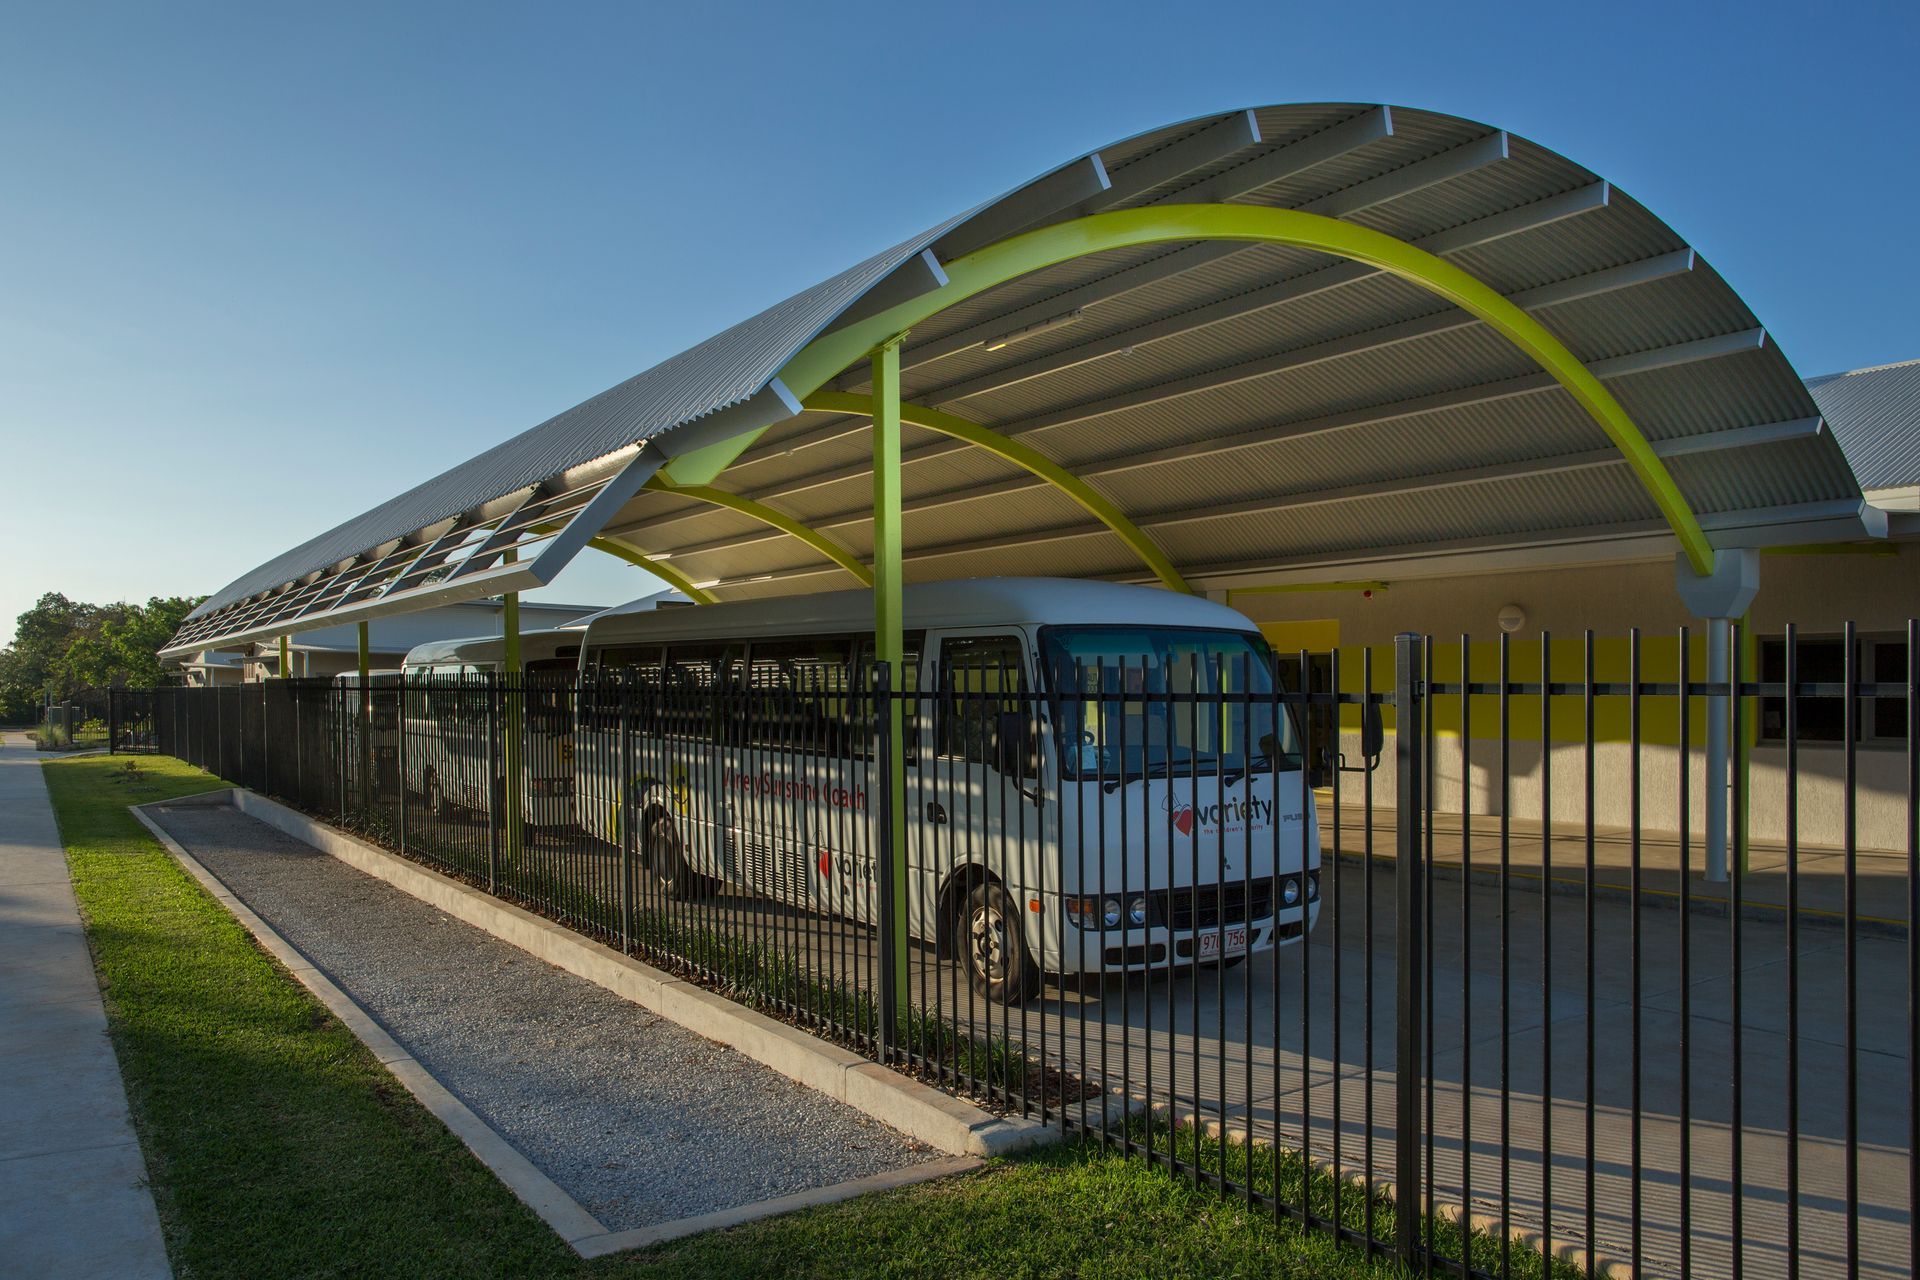 A bus is parked under a canopy in front of a building.